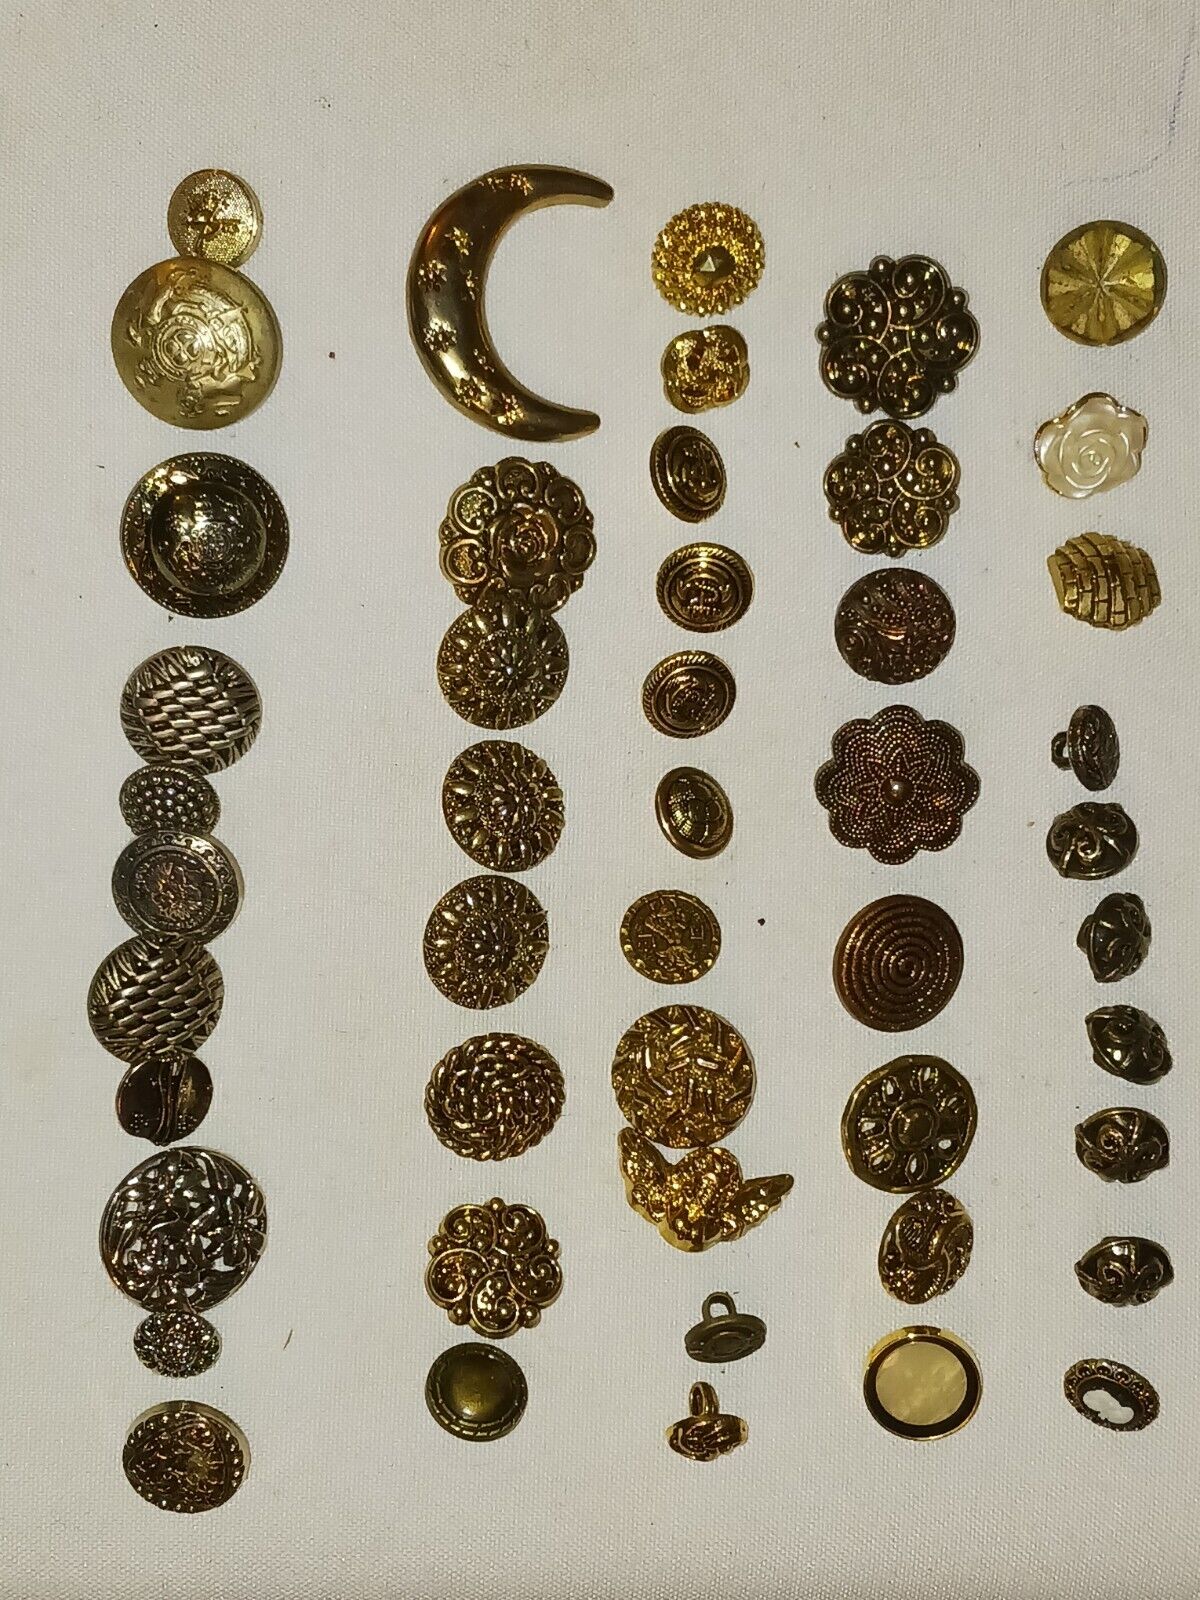 LOT of 48 Vintage Plastic Metal Look Buttons Various Shapes and Sizes (#372)